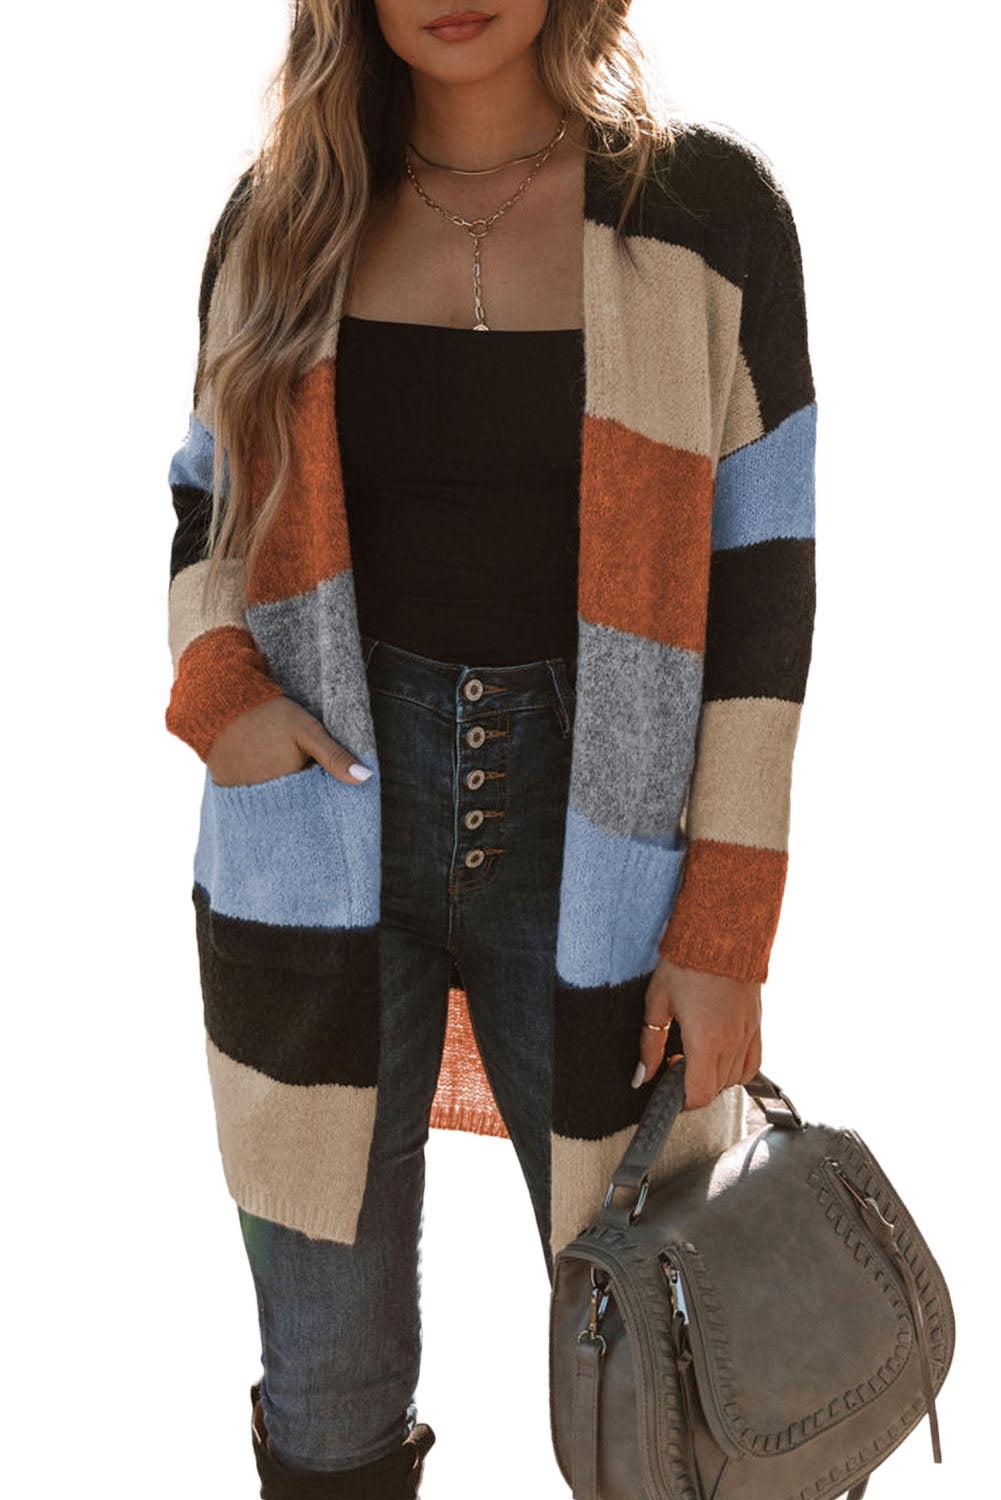 Multicolor Colorblock Pocketed Open Front Cardigan - L & M Kee, LLC